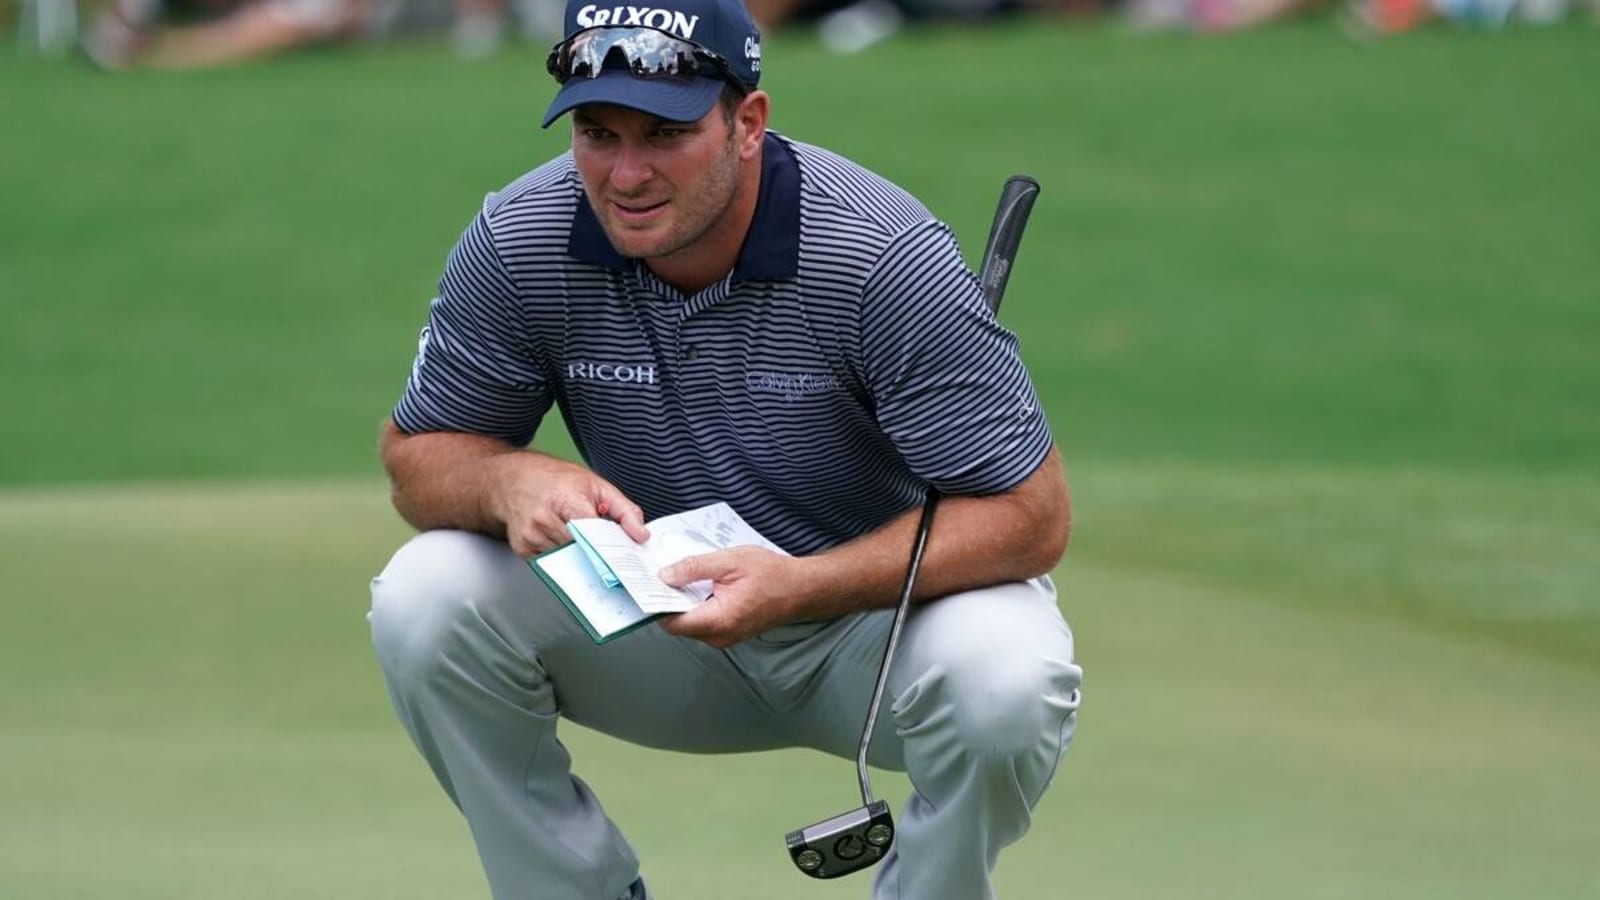 Ryan Fox at the PGA Championship Live: TV Channel & Streaming Online